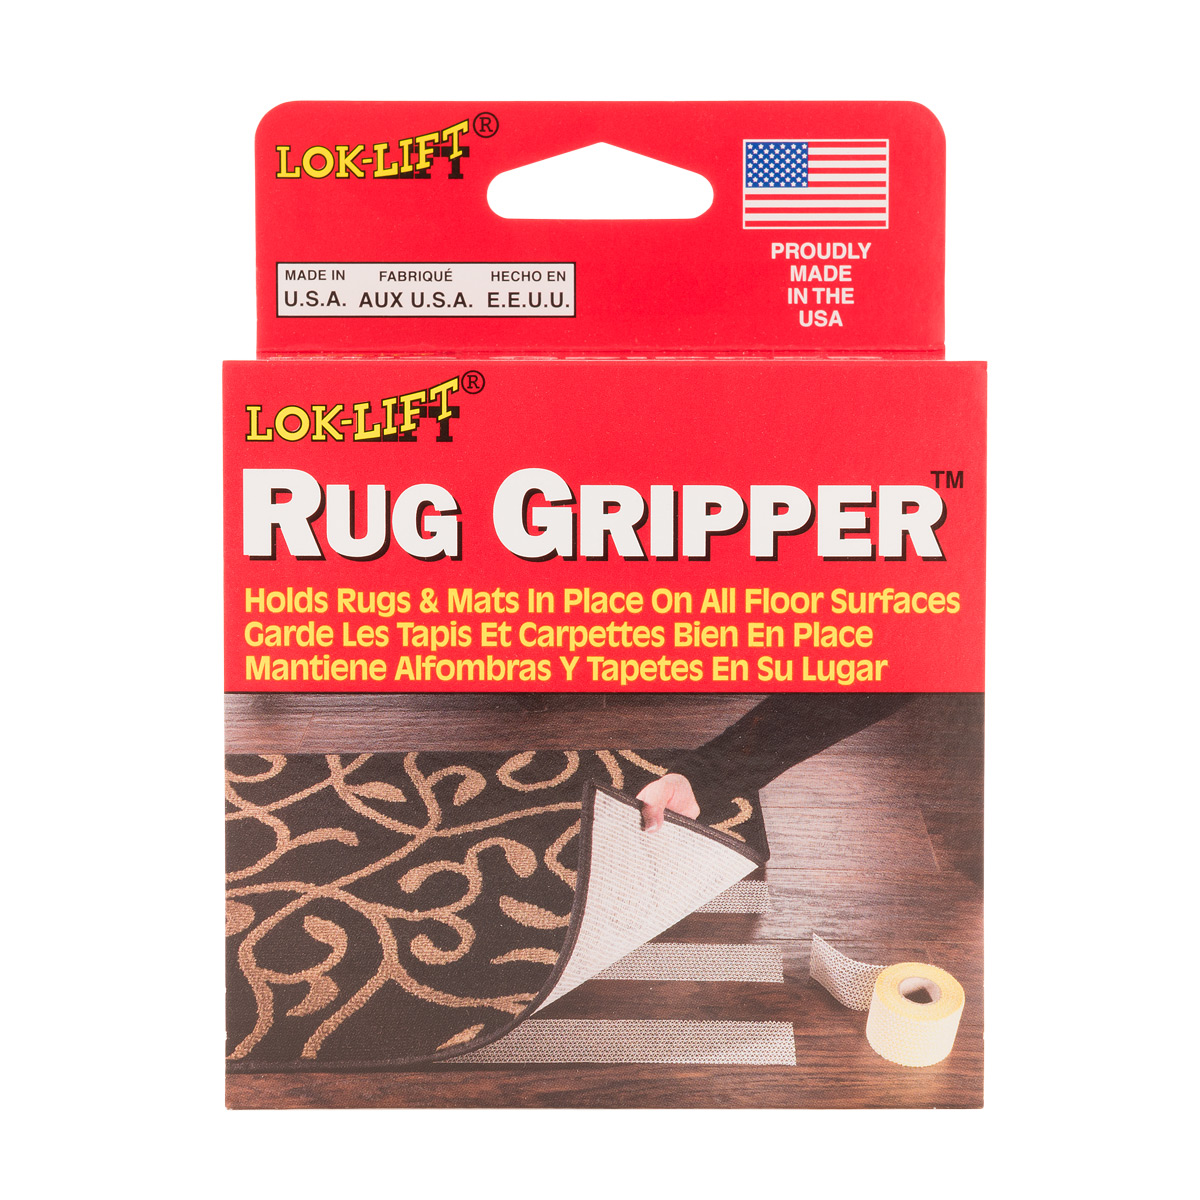 https://www.containerstore.com/catalogimages/314277/10061894-outdoor-rug-gripper-roll.jpg